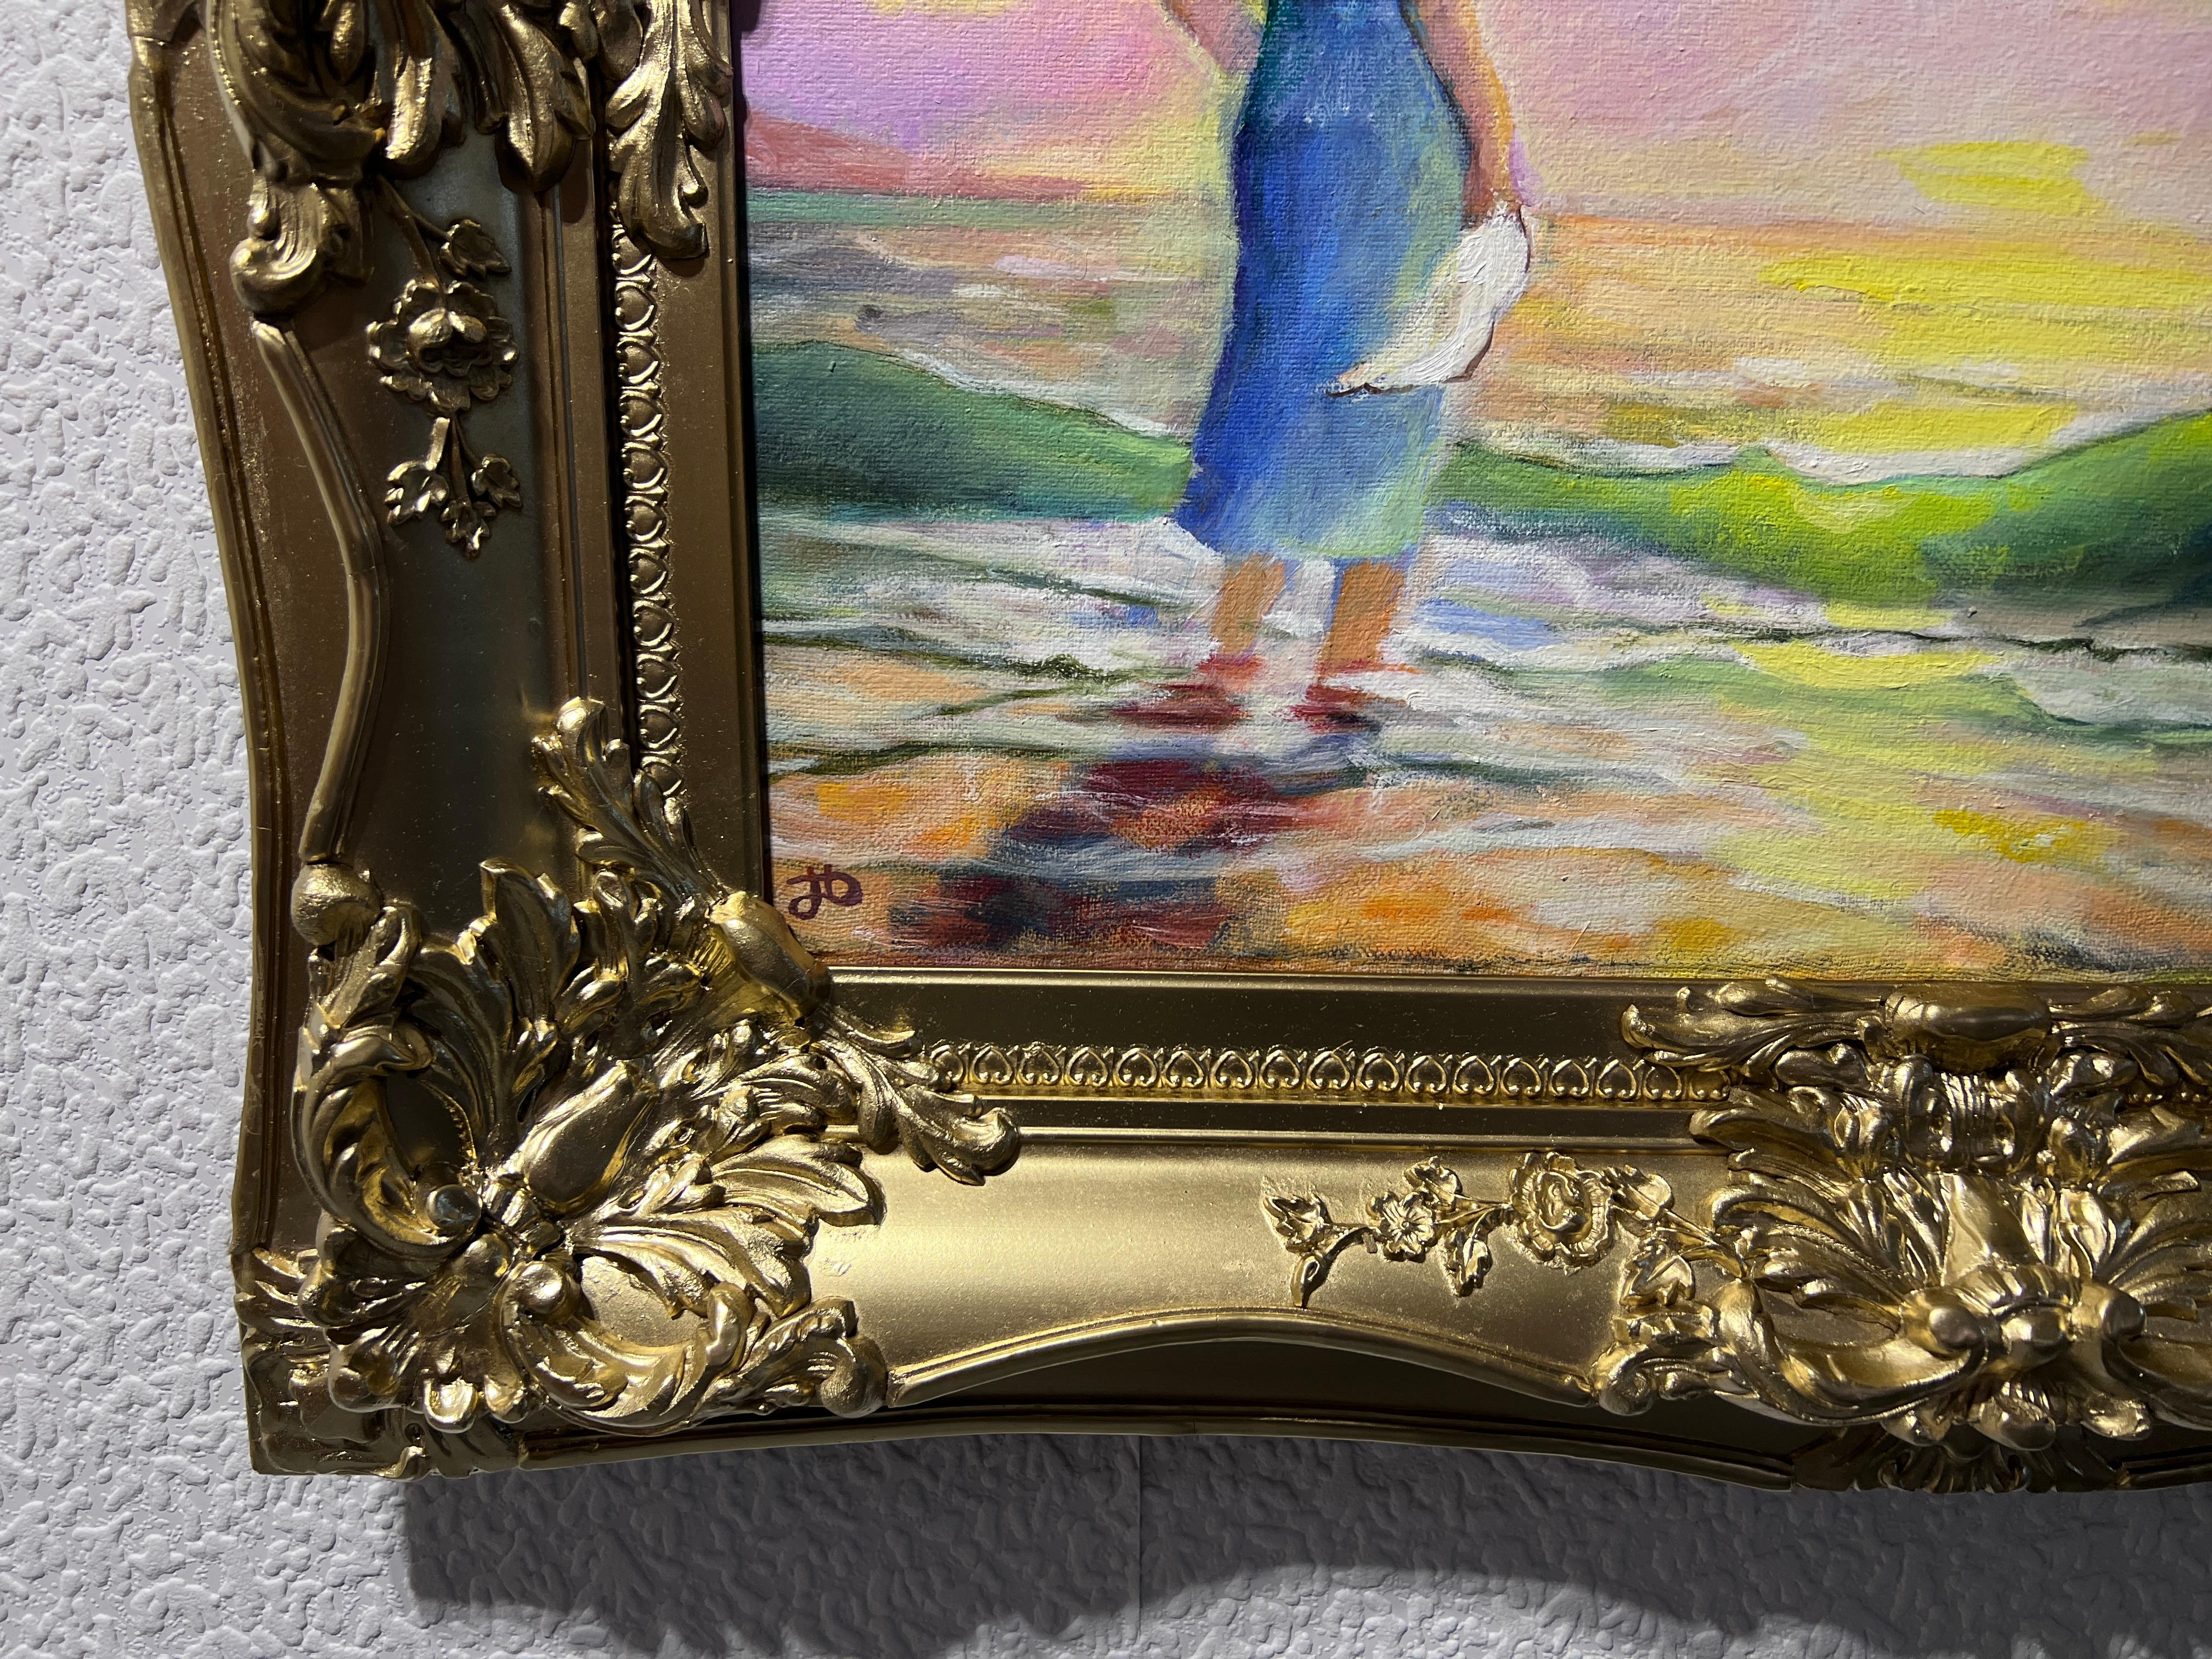 This is an original signed oil painting on canvas by Russian Artist  N.I. Dobritsin, depicting a young girl in a blue dress and with a white handkerchief in hand standing on the seashore, gazing at a sailboat with scarlet sails on the horizon. The